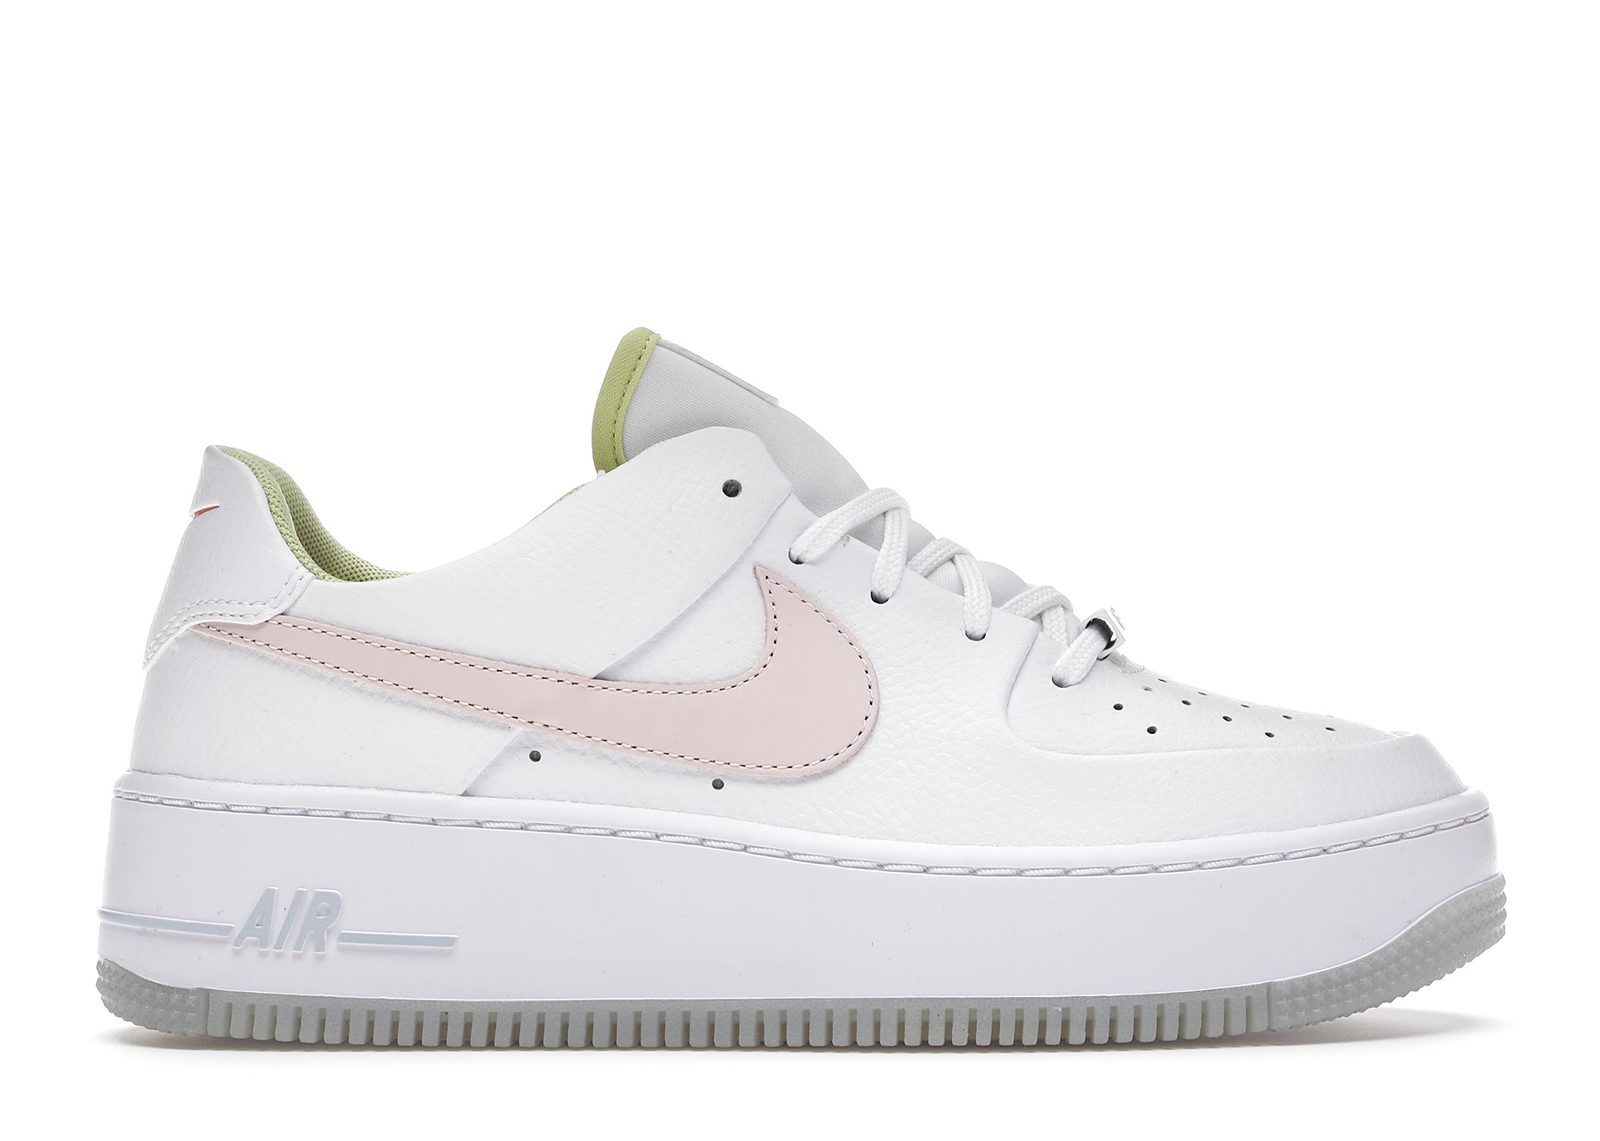 Nike Air Force 1 Sage Low One Of One (Women's) - CW5566-100 - US